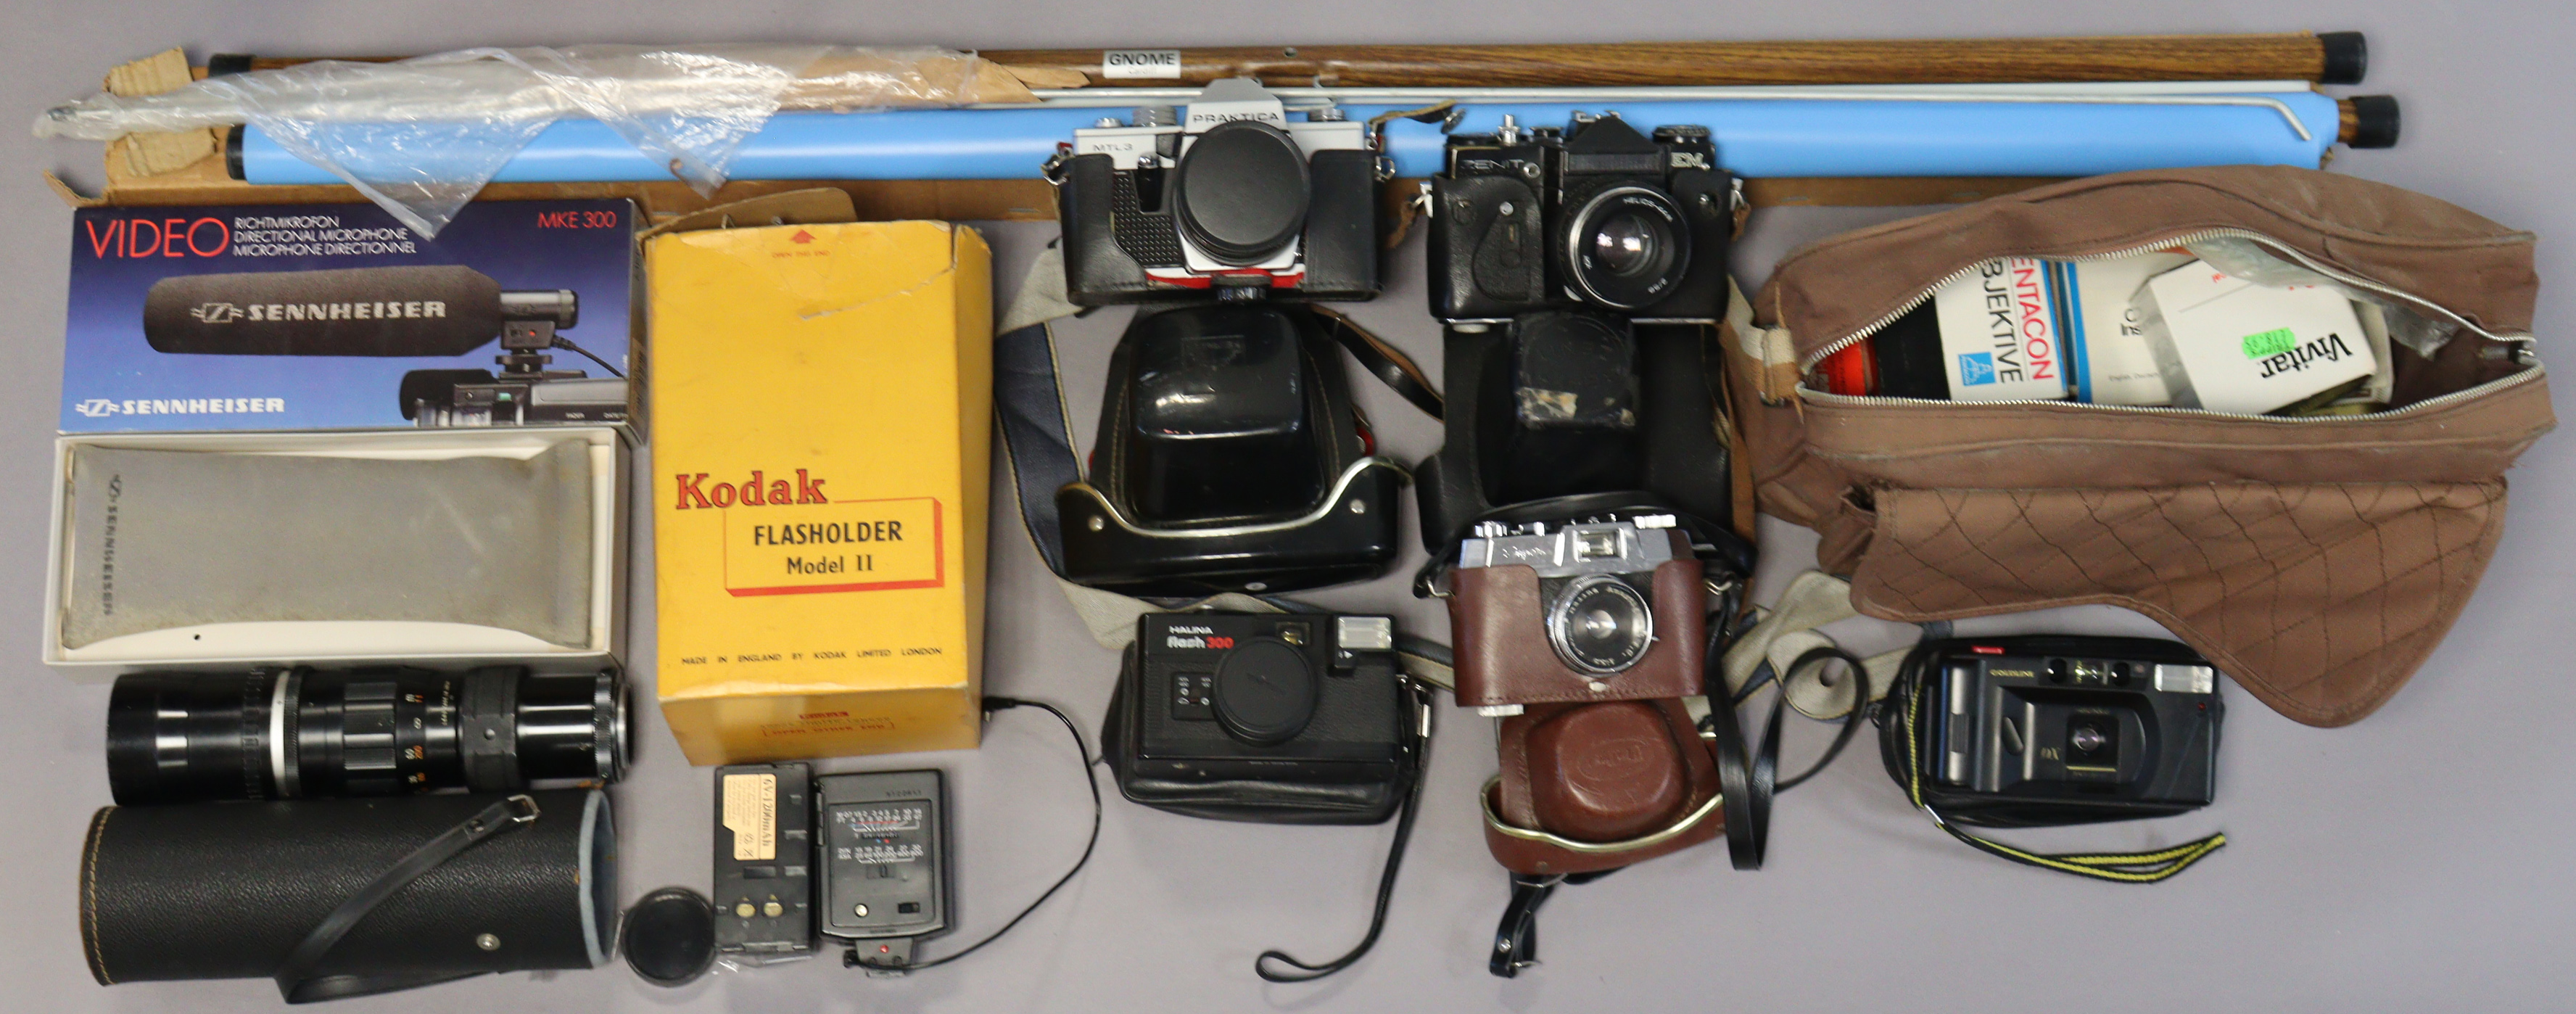 A Praktica “MTL3” camera, together with five other cameras, & various camera accessories.